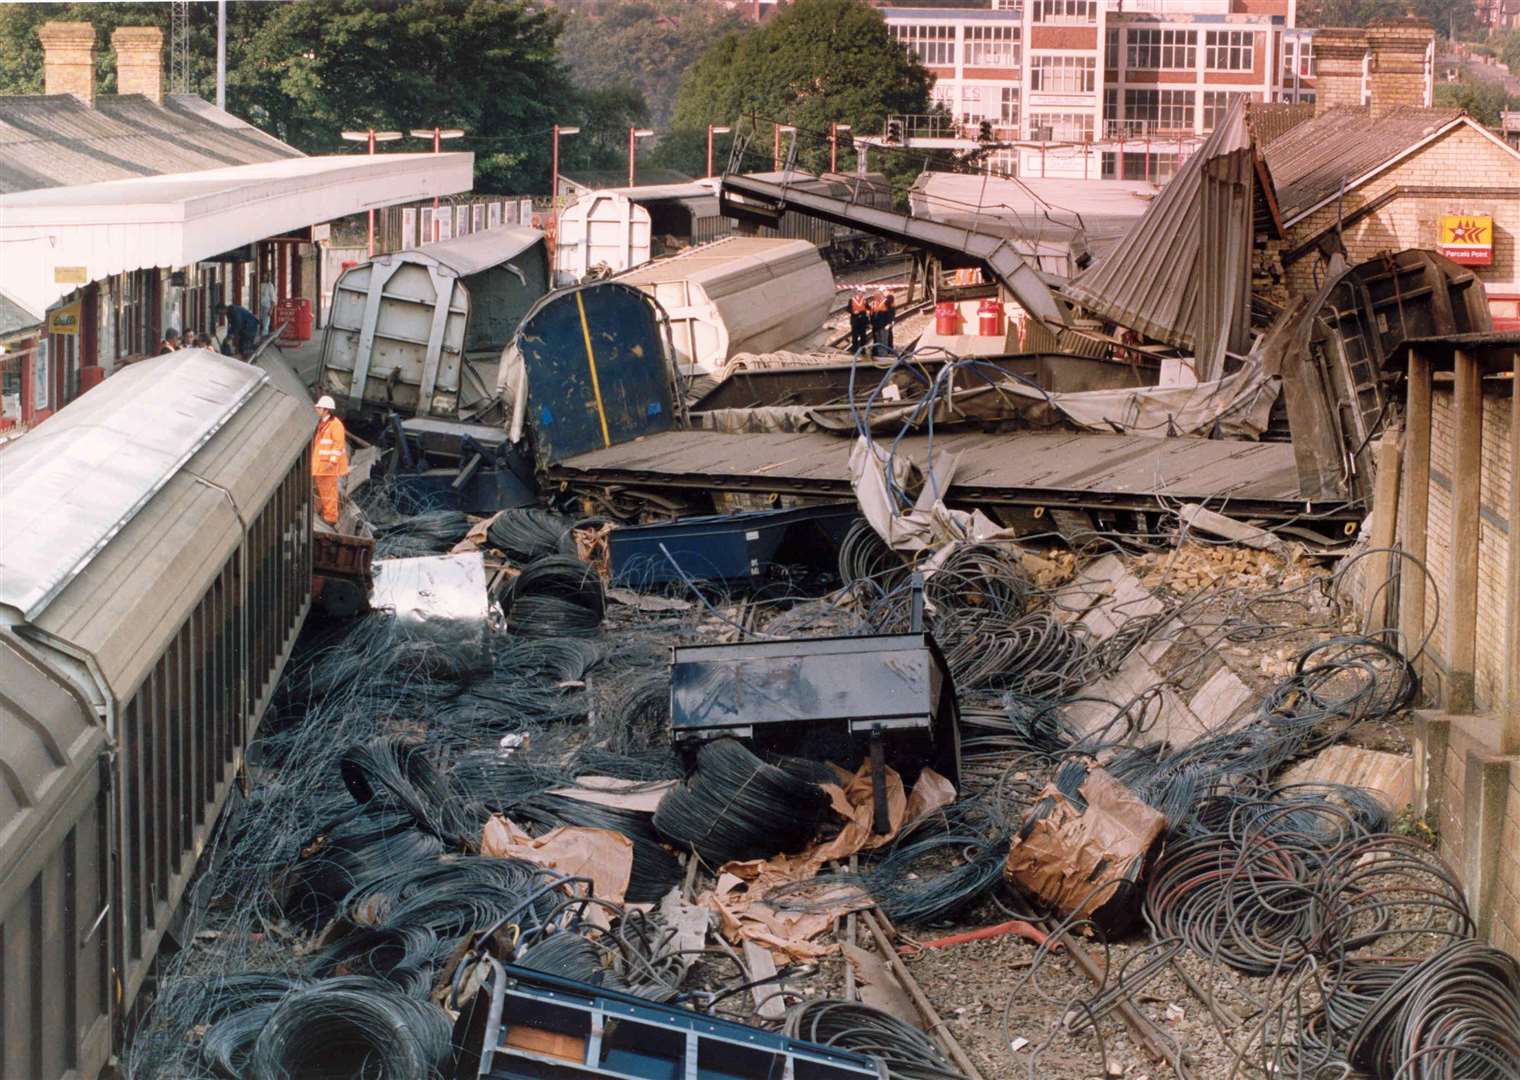 The freight train demolished Maidstone East station in 1993